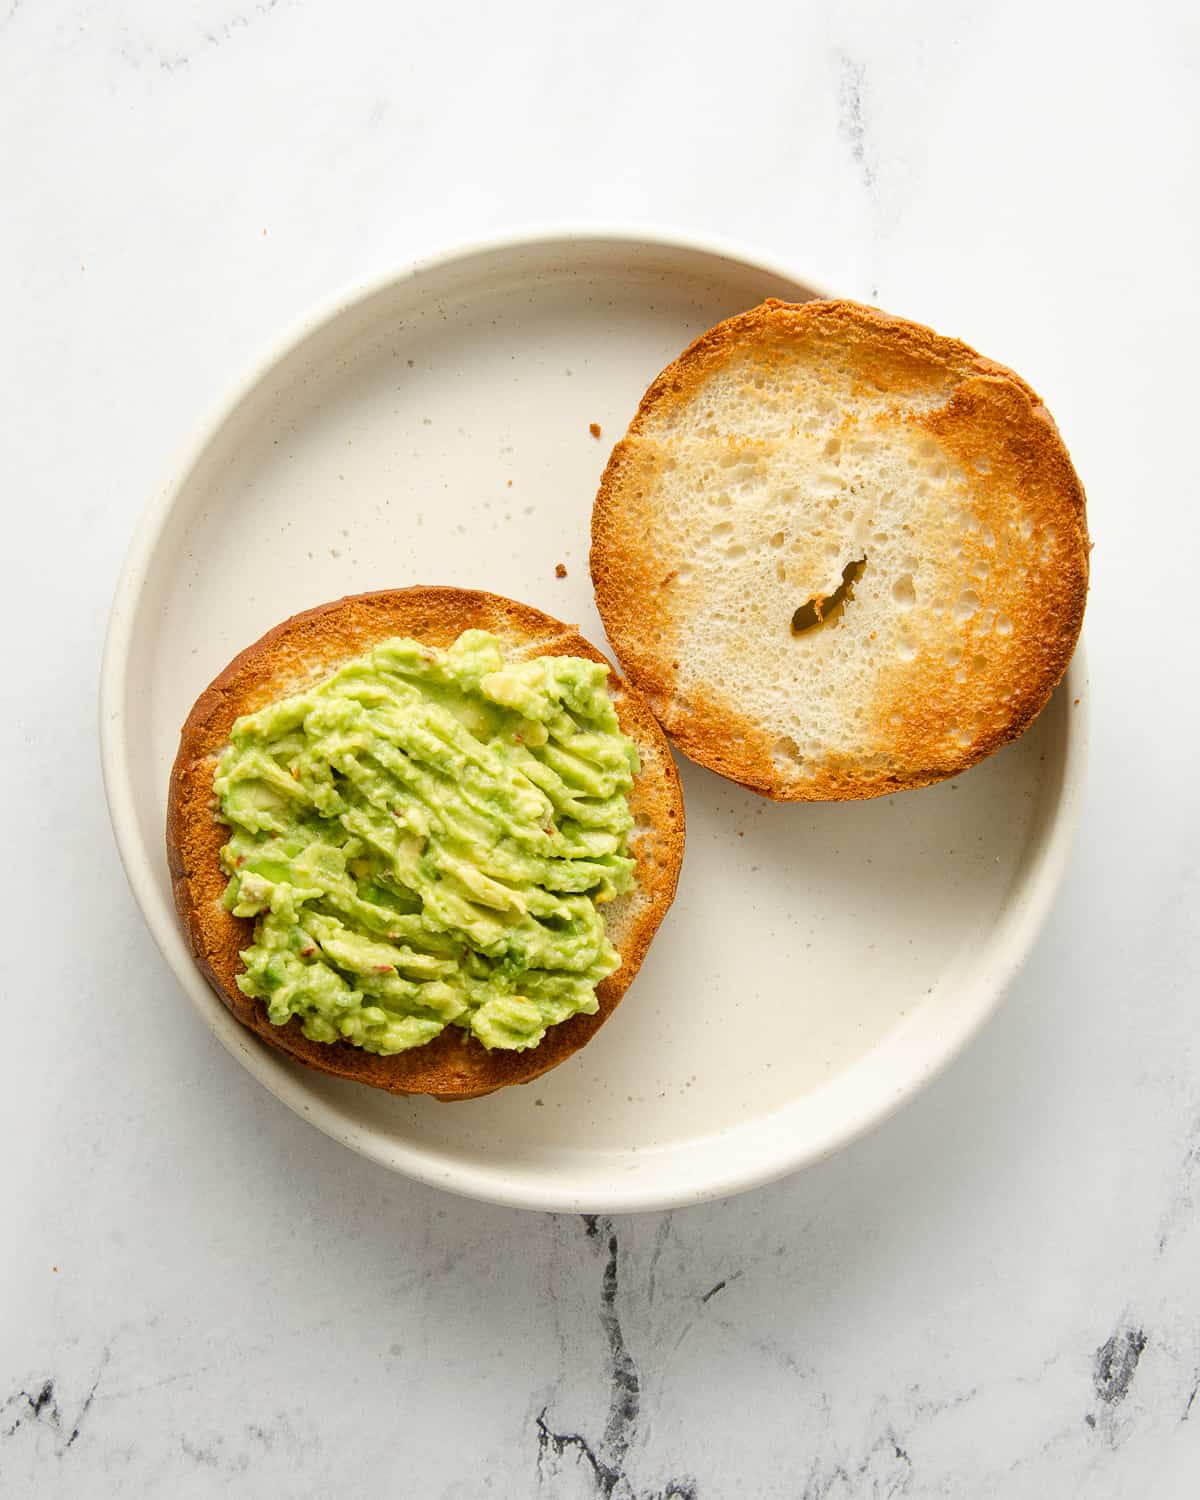 Two halves of a toasted bagel with mashed avocado on one side on a white plate.